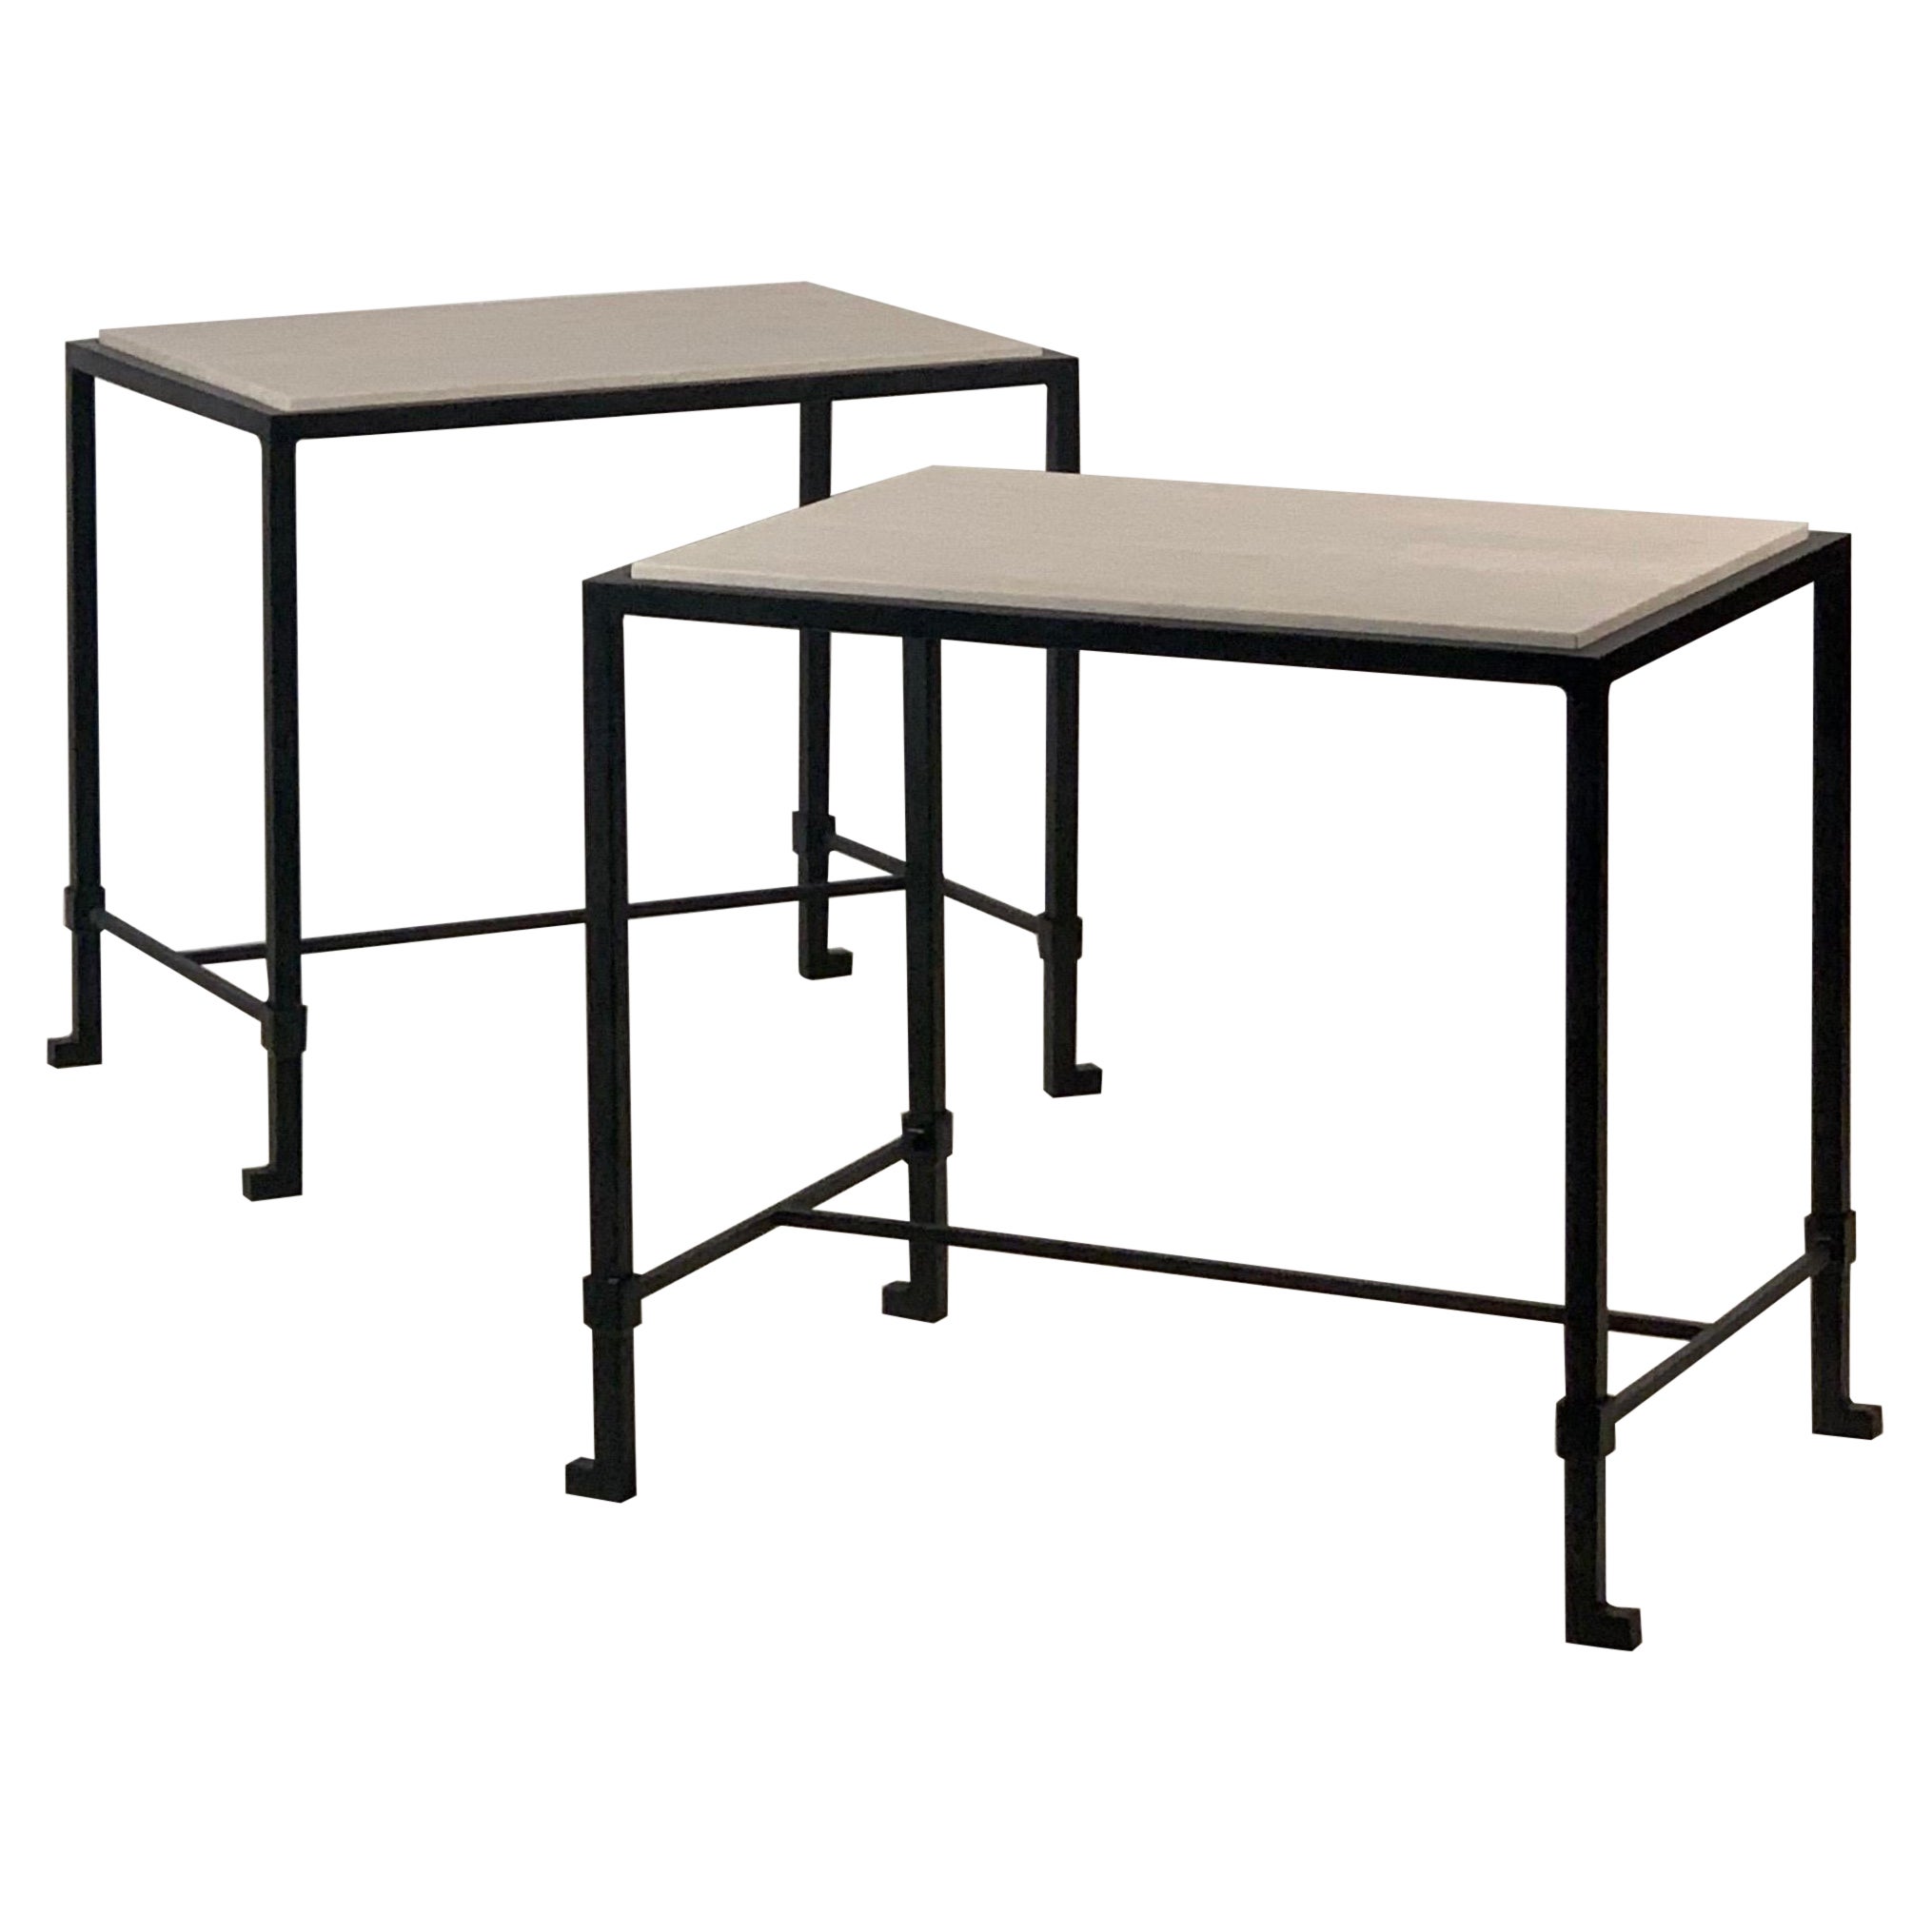 Pair of 'Diagramme' Blackened Iron and Travertine End Tables by Design Frères For Sale